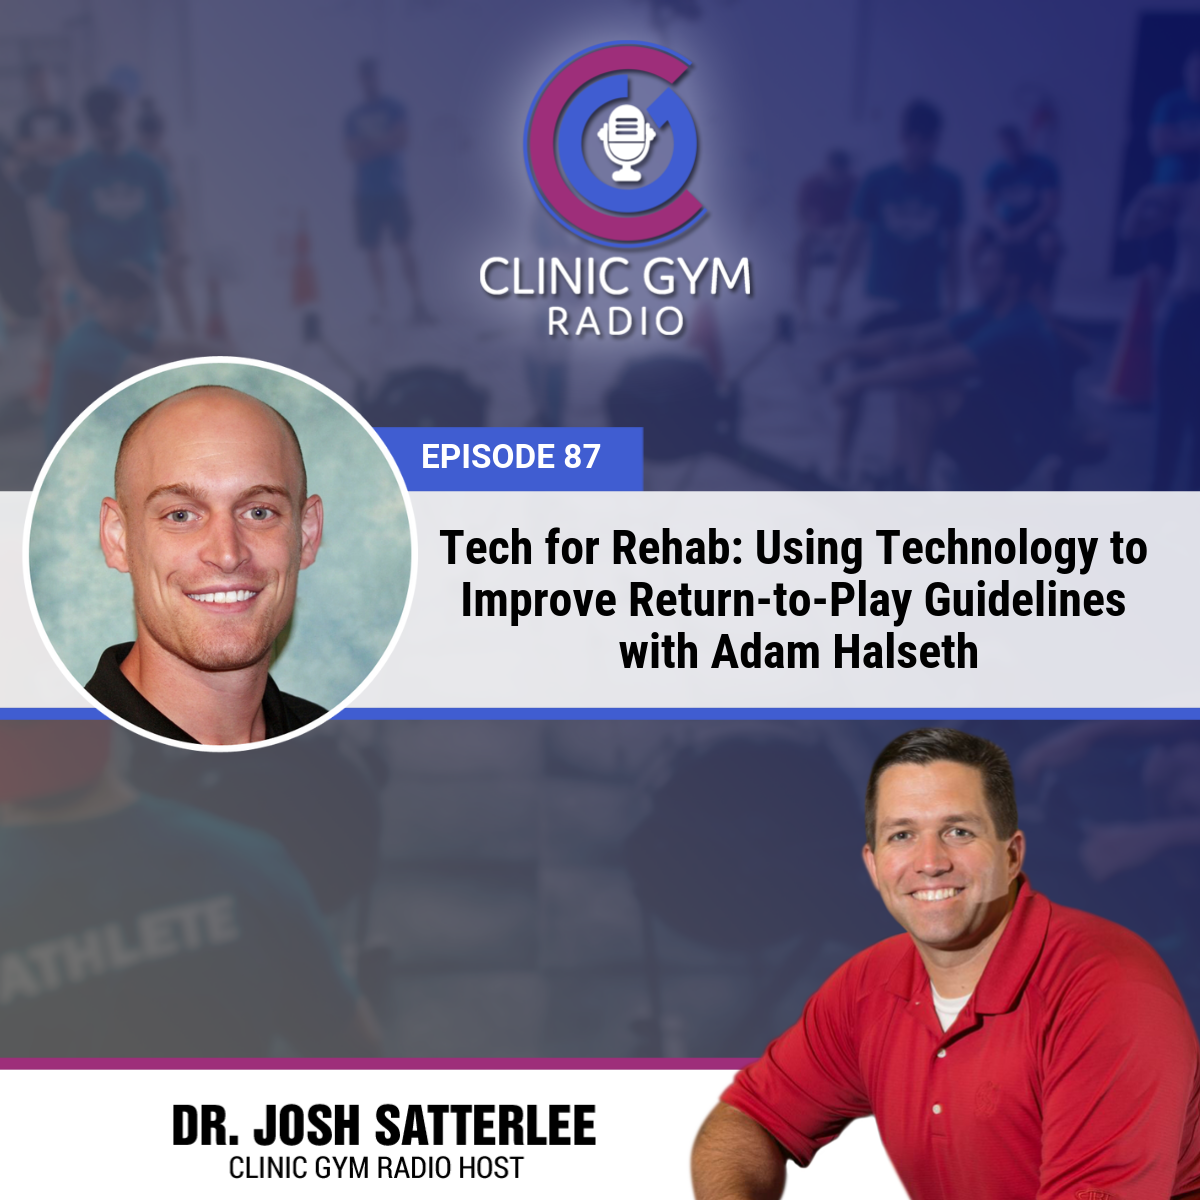 Tech for Rehab: Using Technology to Improve Return-to-Play Guidelines with Adam Halseth